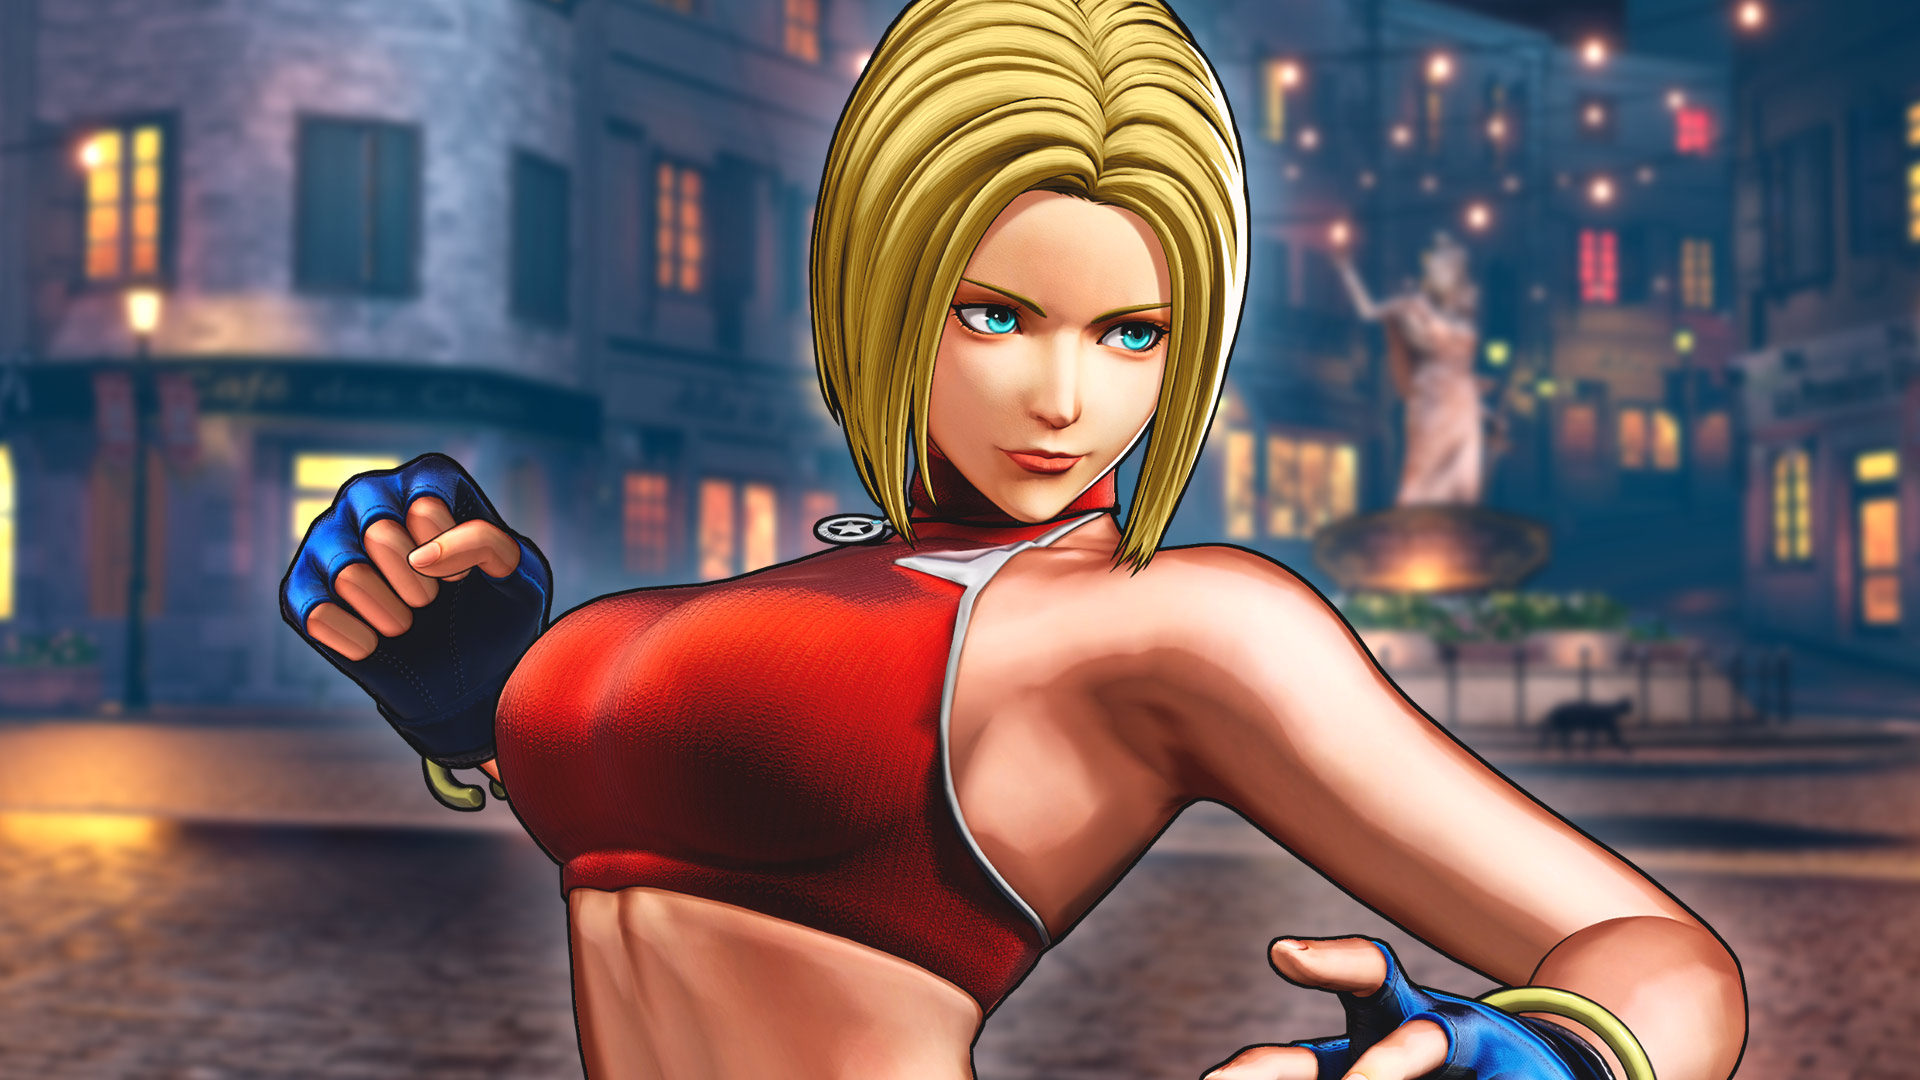 the king of fighters xv, video game, blue mary